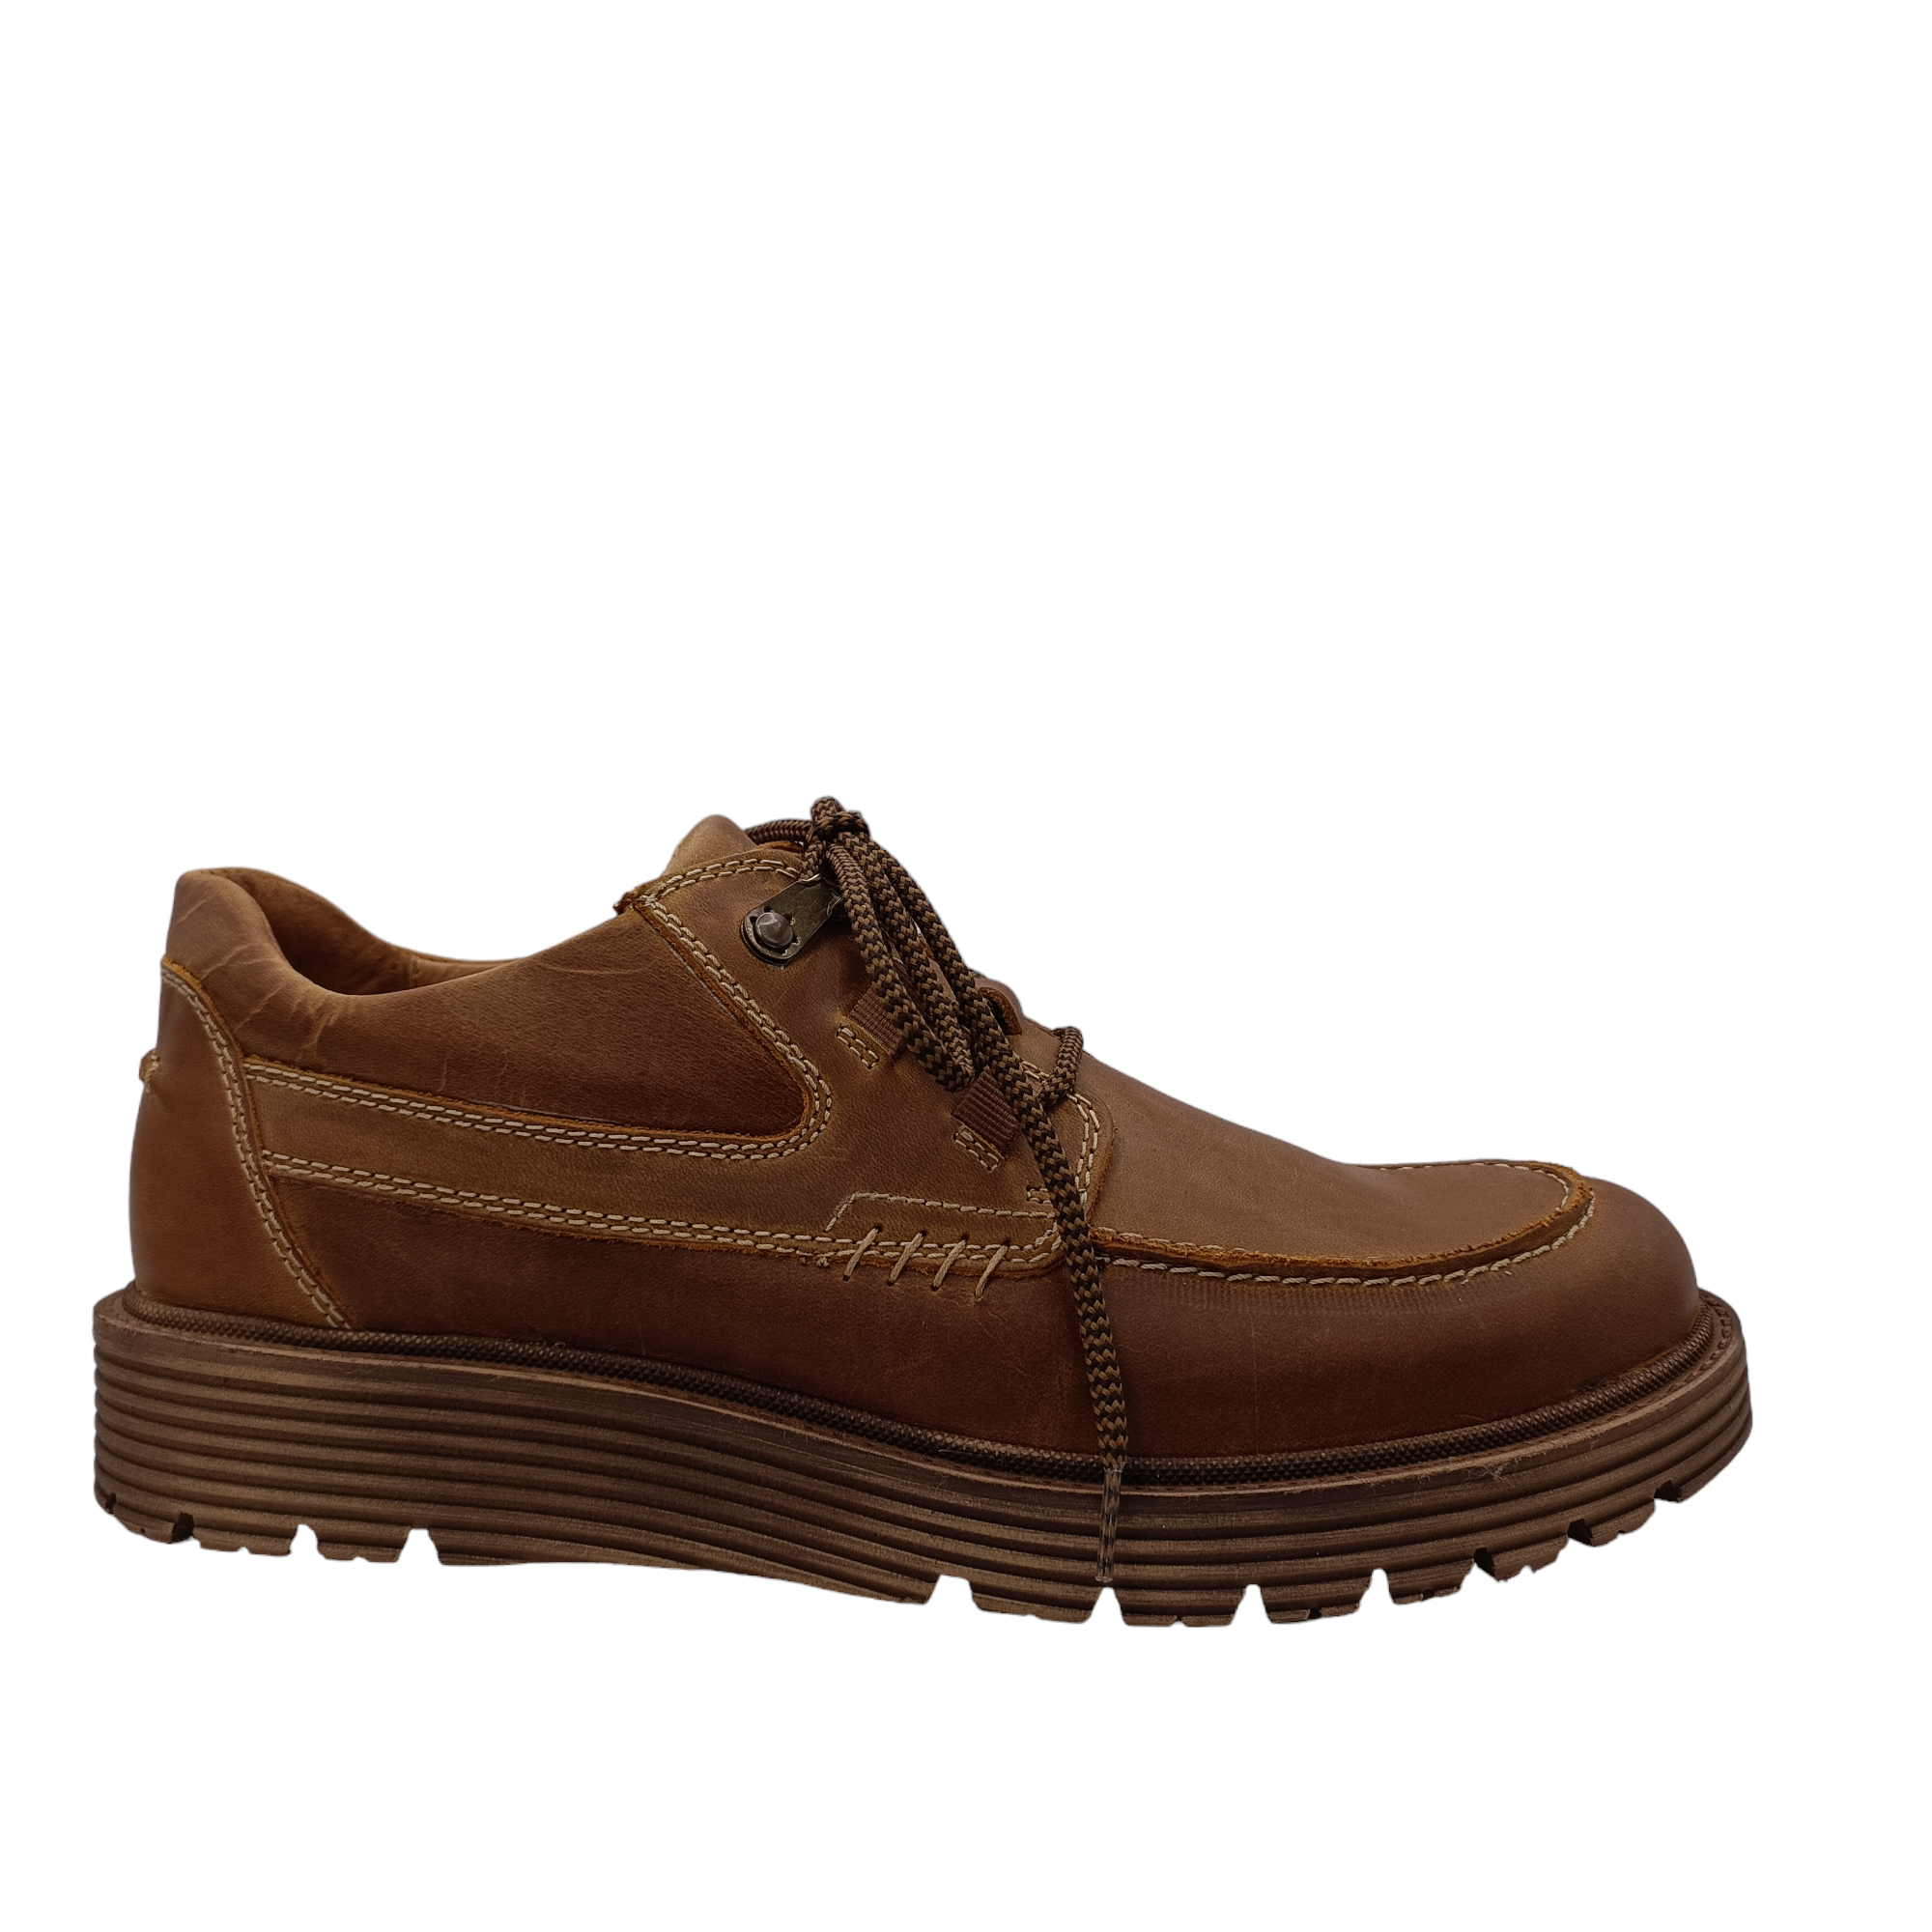 Shop Cooper 06 Josef Seibel - with shoe&me - from Josef Seibel - Shoes - Mens, Shoe, Winter - [collection]